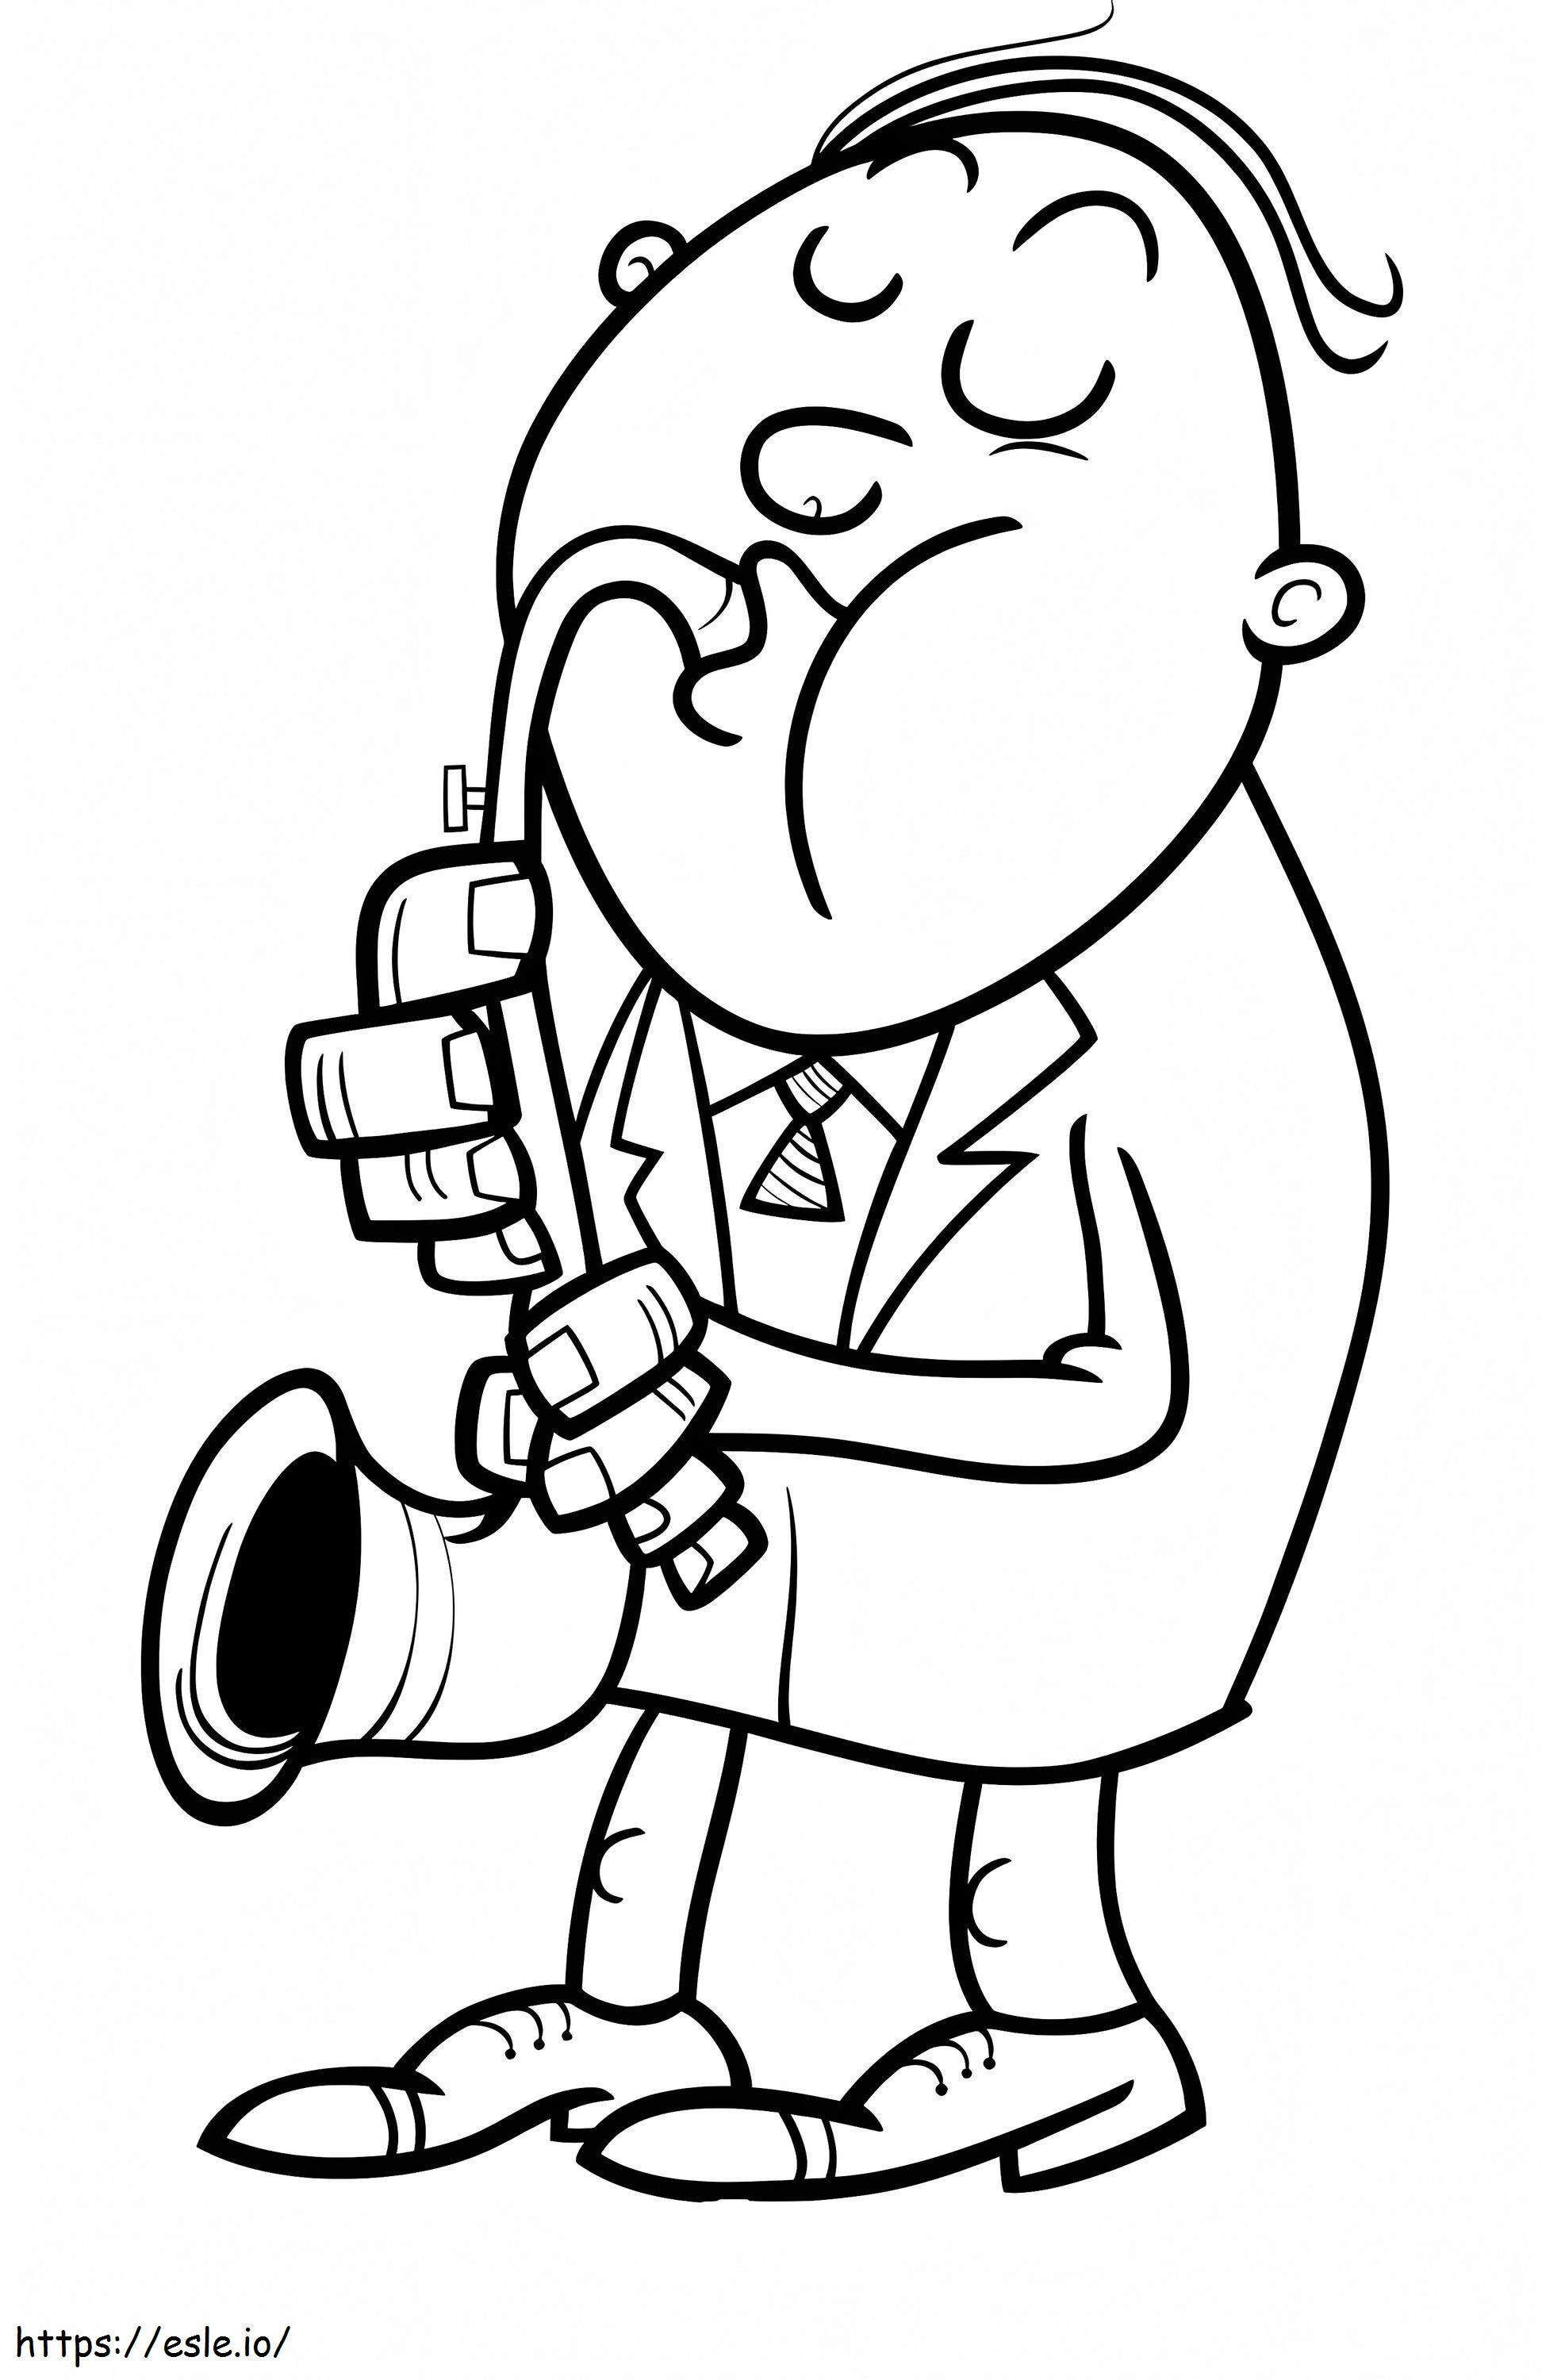 1542094787 Man With Saxophone Vector 2760302 coloring page